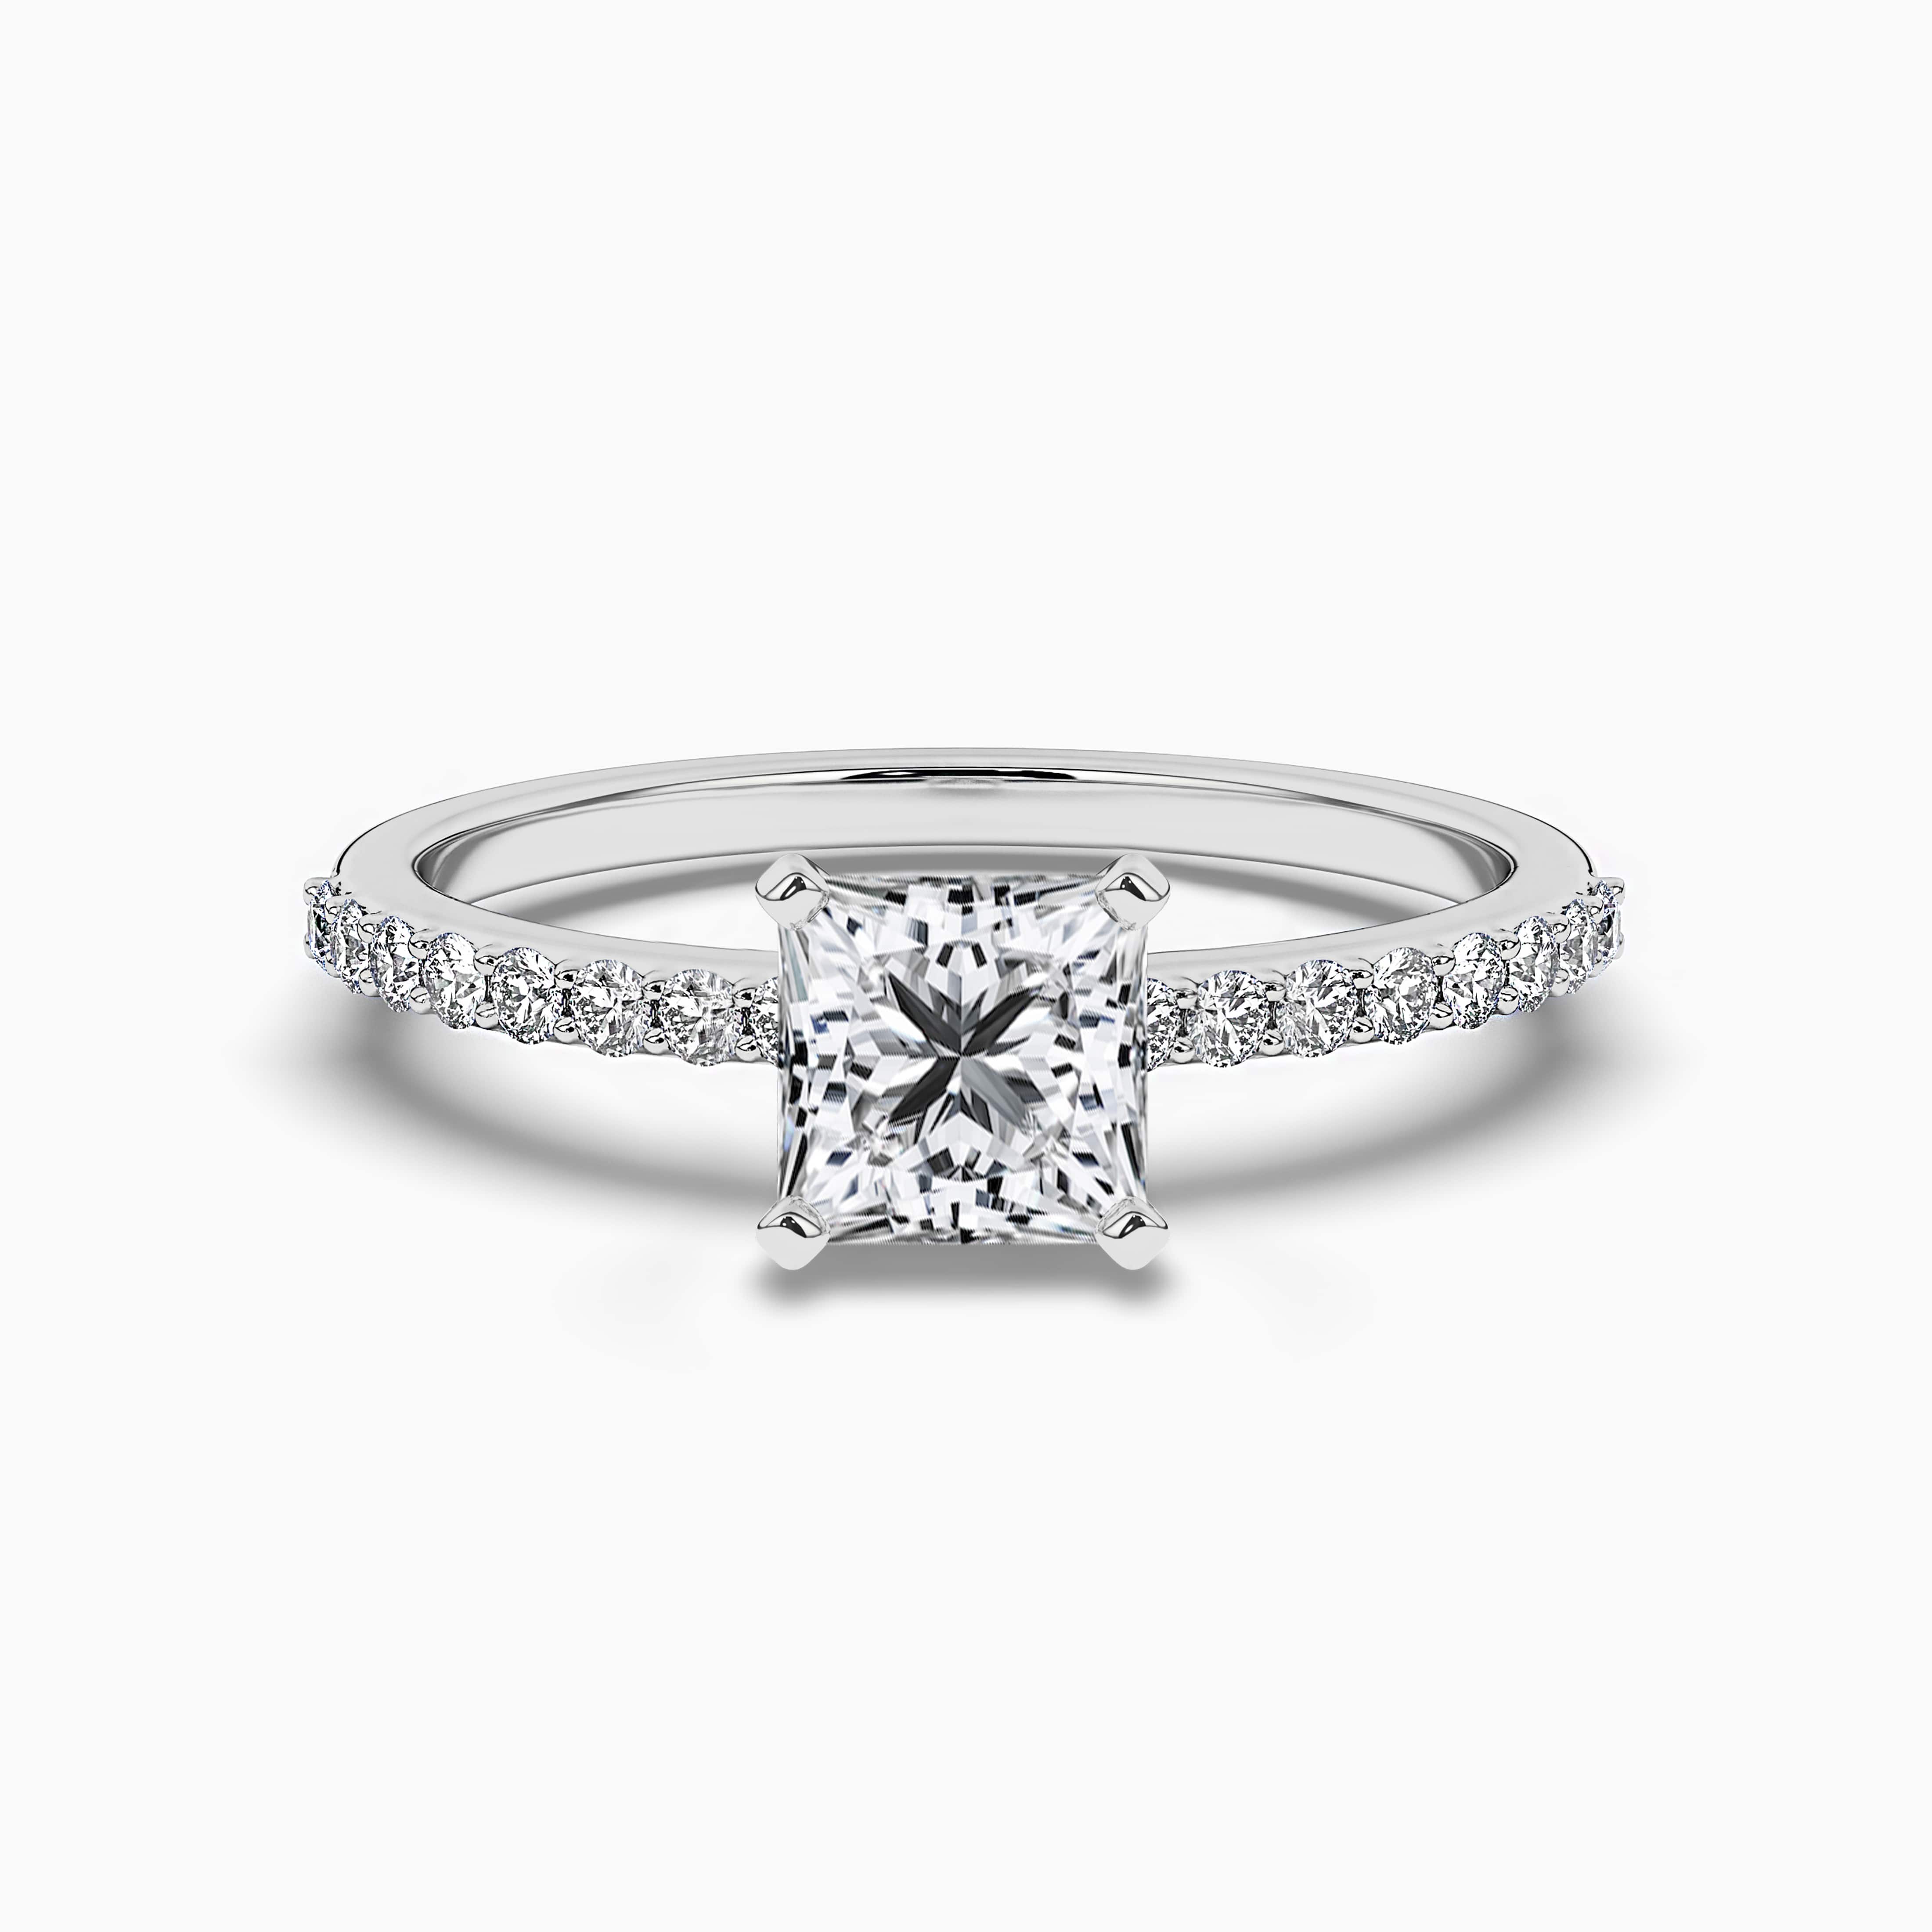 WHITE GOLD PRINCESS CUT DIAMOND SOLITAIRE ENGAGEMENT RING